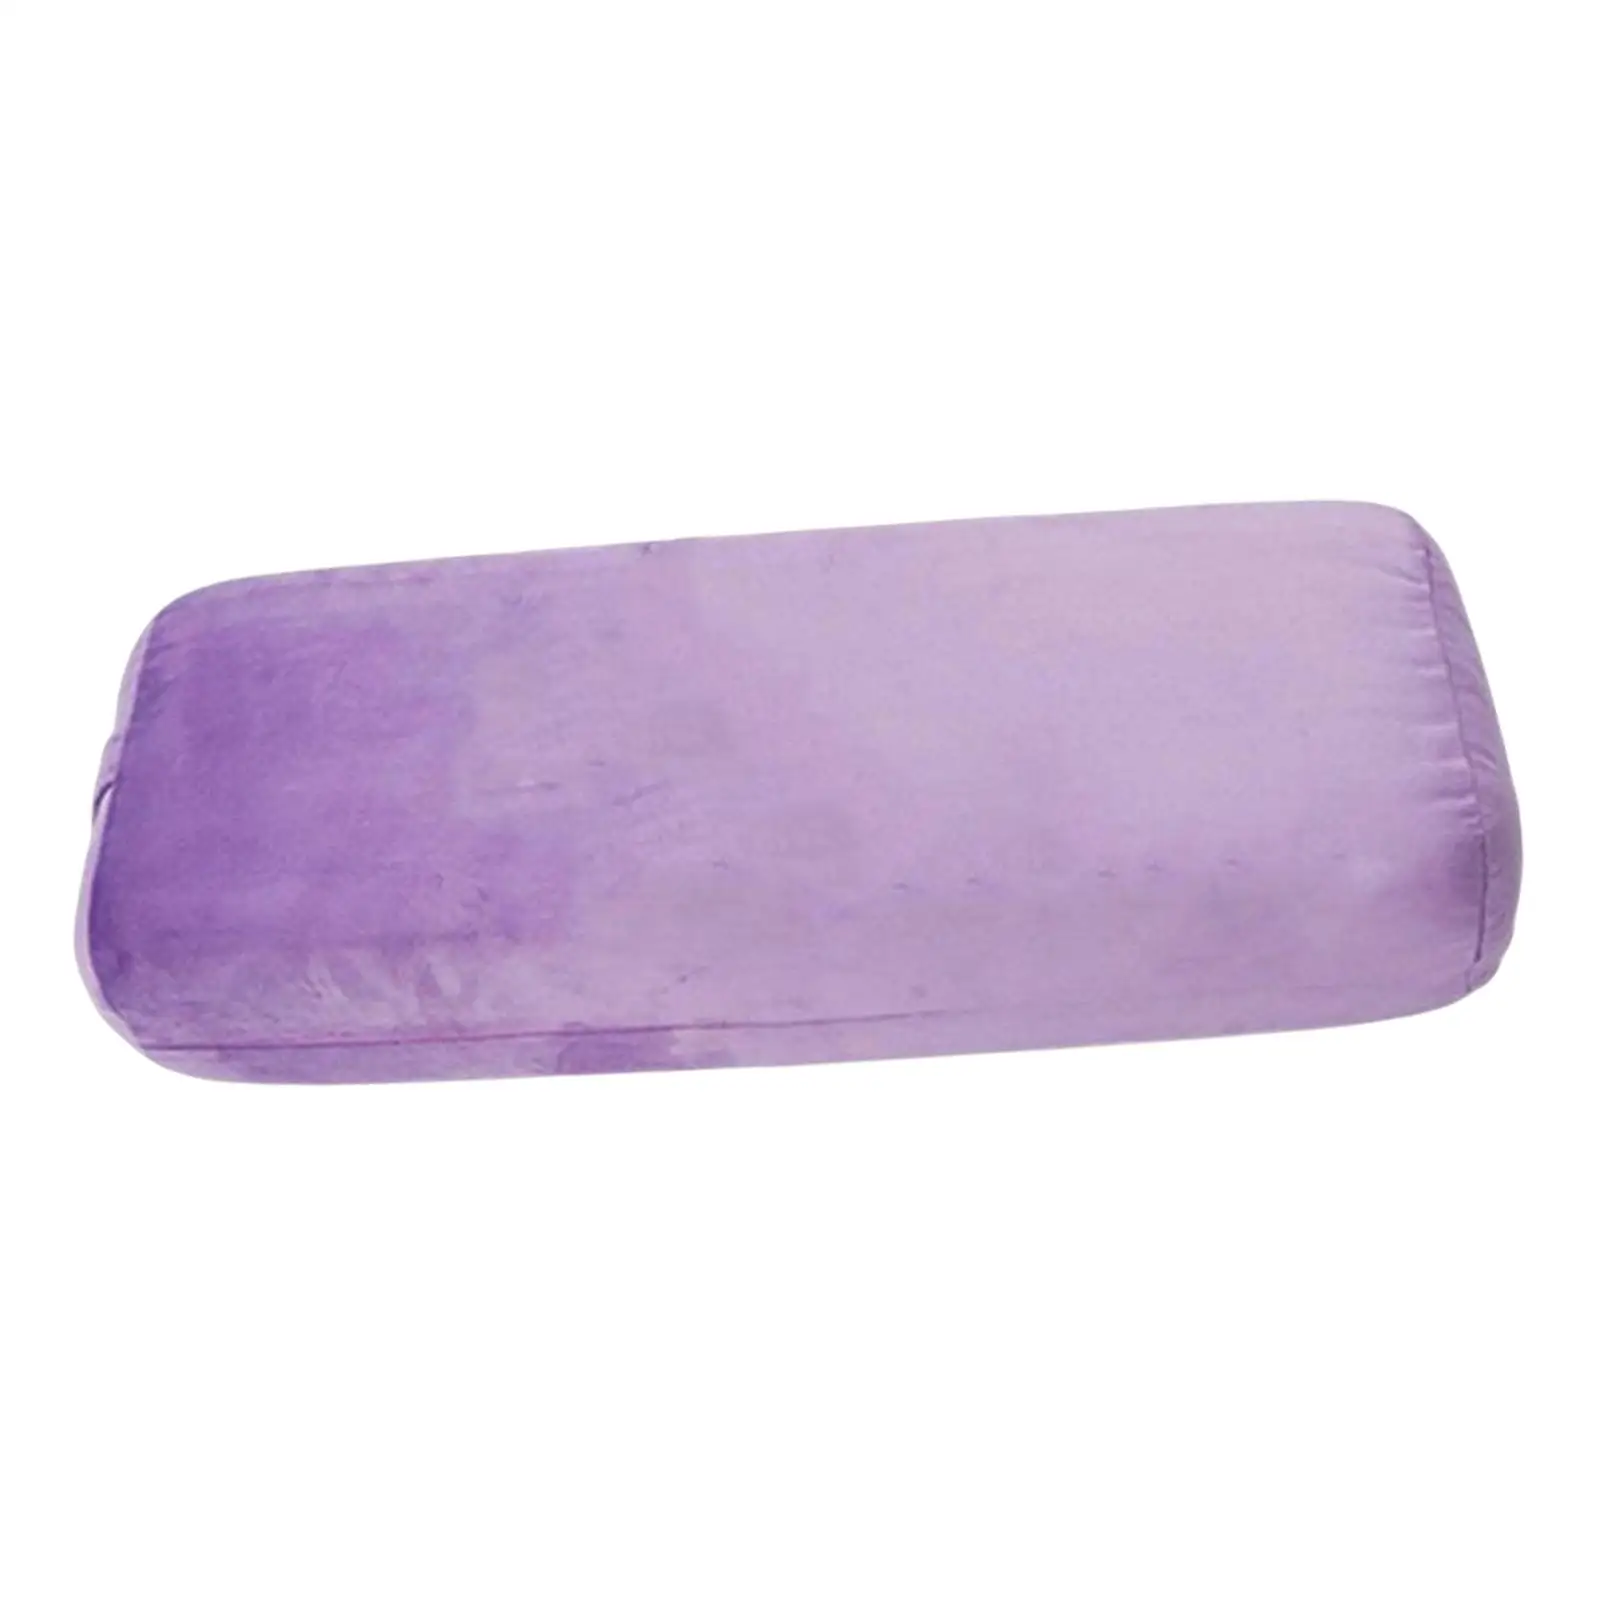 Yoga Bolster Pillow Yoga Pillow Firm Body Removable Washable Cover Sponge Meditation Cushion Support Pillow for Soft Support